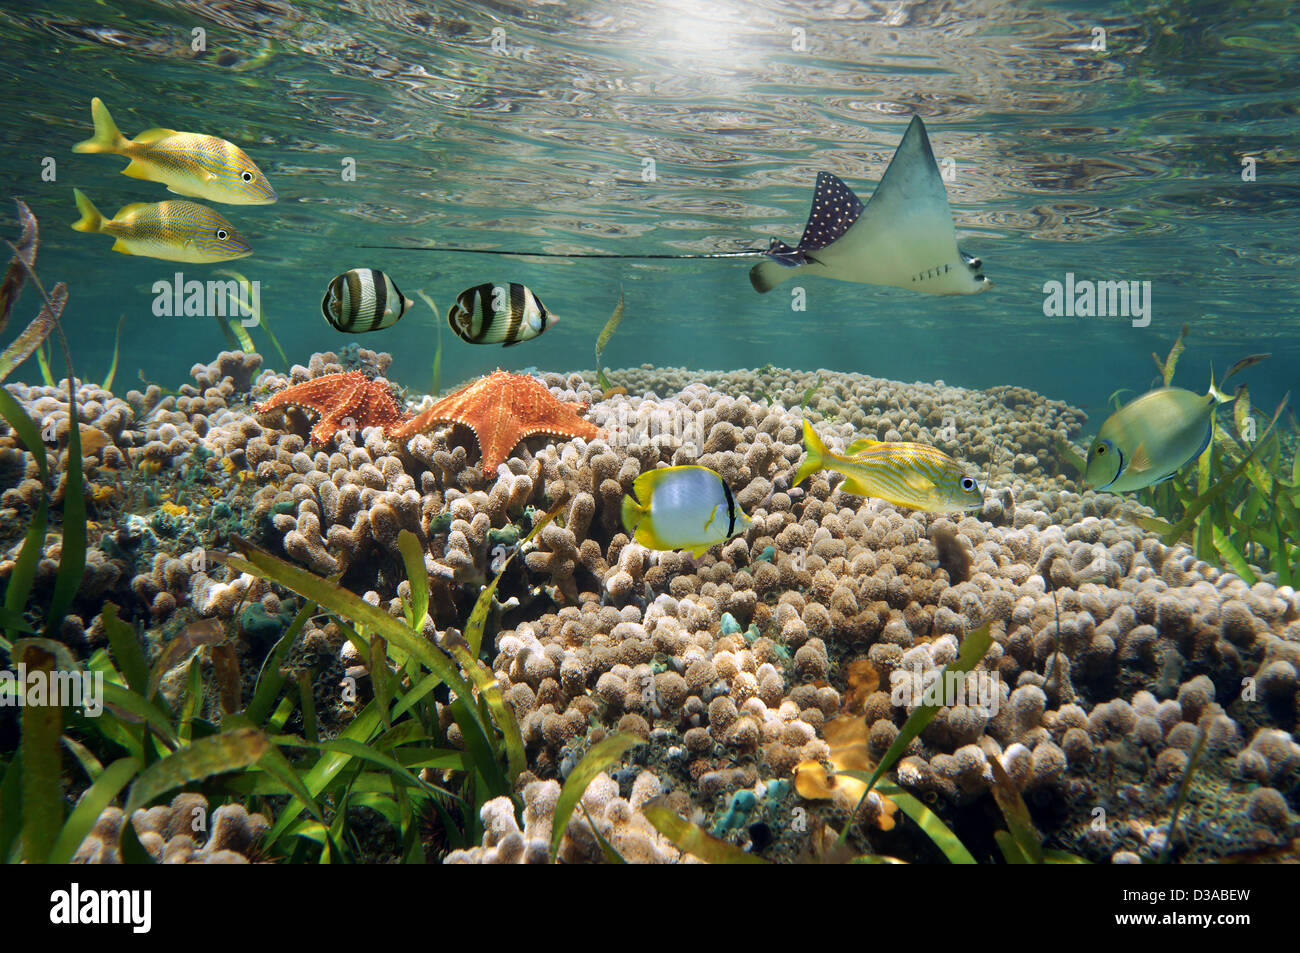 Underwater sea life in a shallow coral reef with tropical fish, starfish and an eagle ray, Caribbean sea Stock Photo